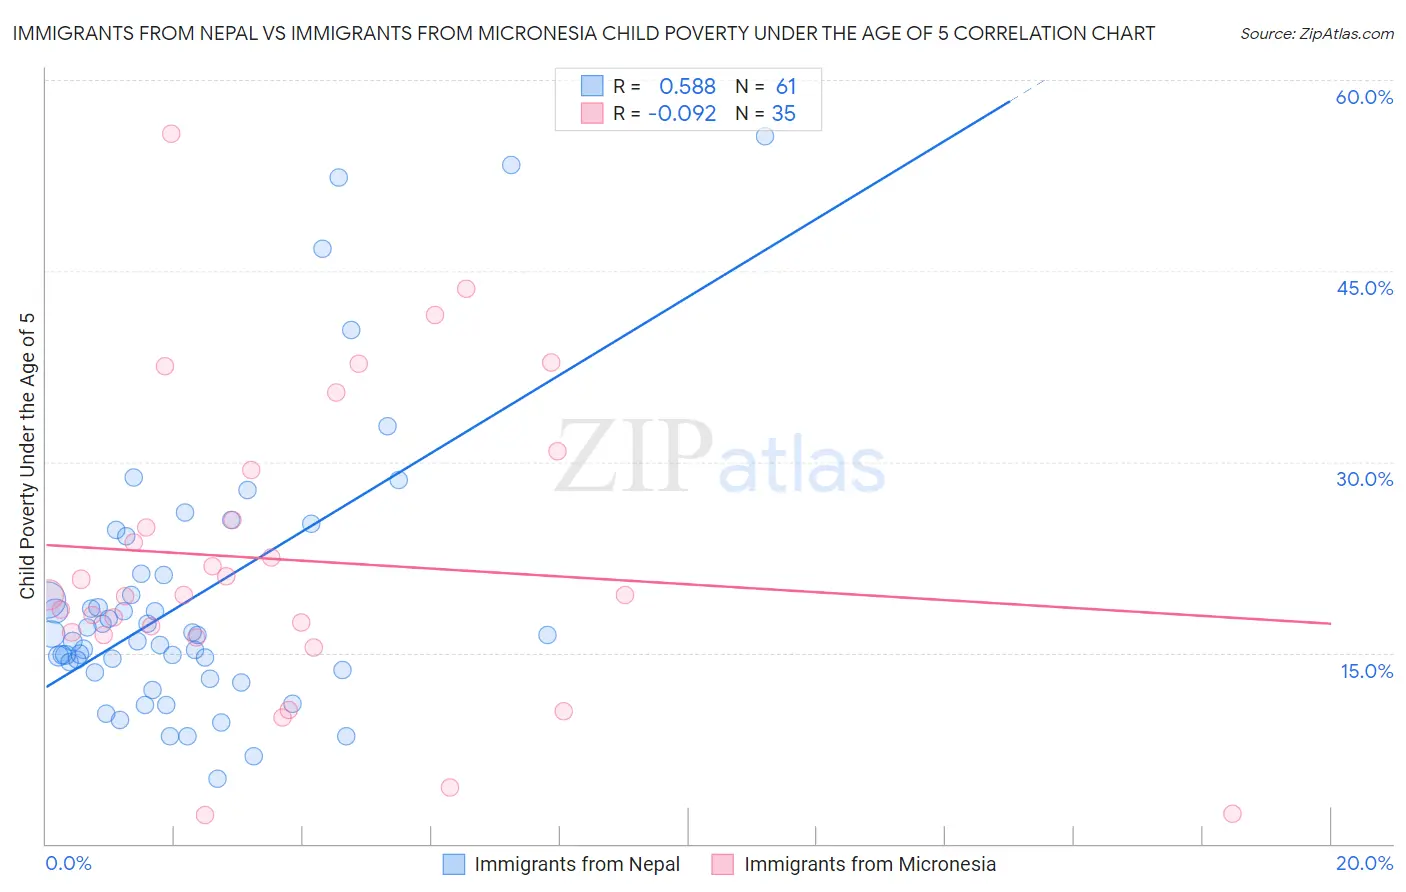 Immigrants from Nepal vs Immigrants from Micronesia Child Poverty Under the Age of 5